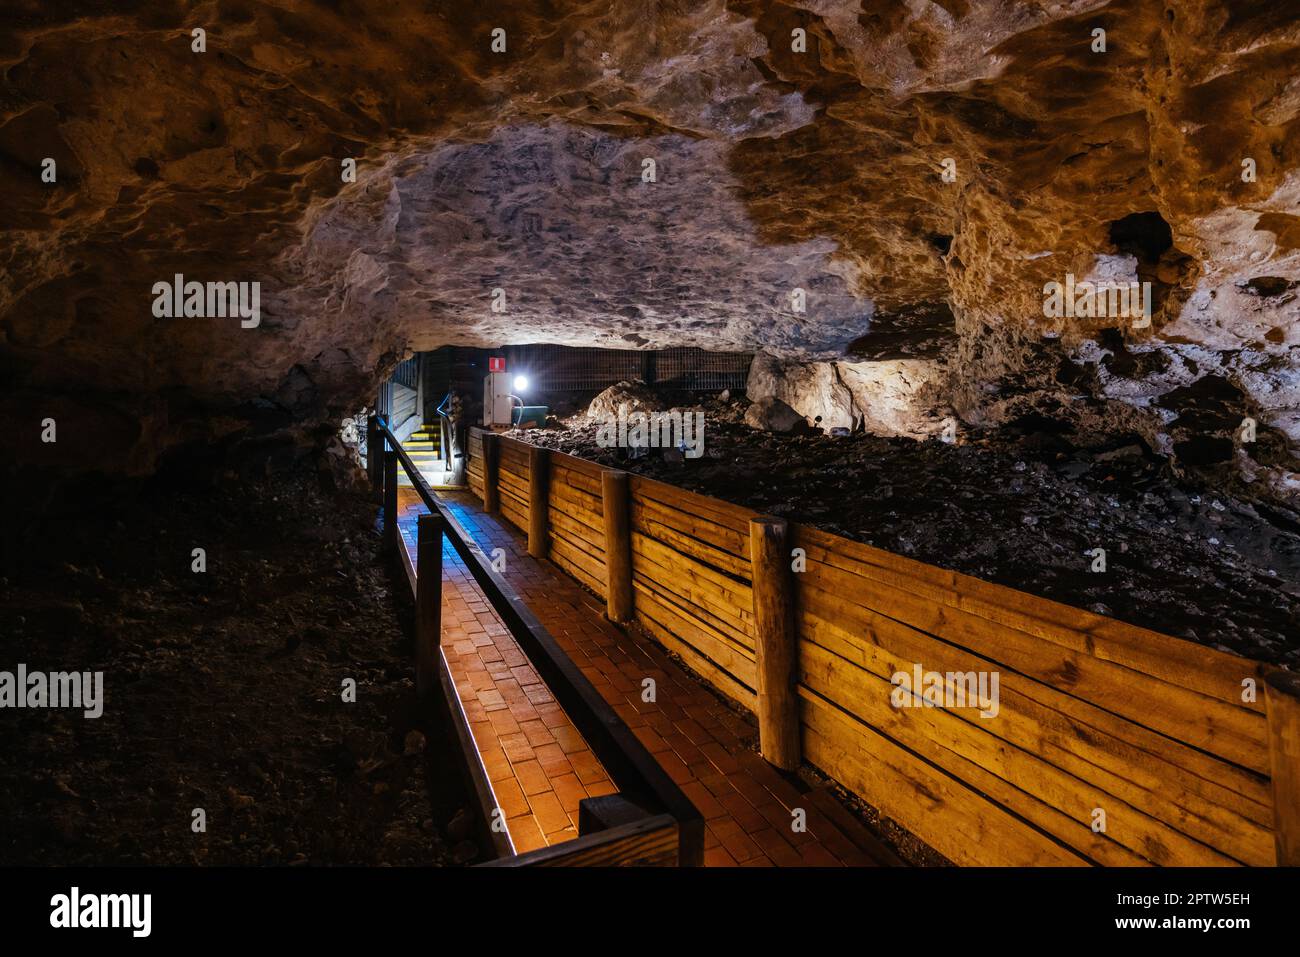 The iconic and popular Engelbrecht Cave system which is a sinkhole underneath Mt Gambier CBD in South Australia, Australia Stock Photo